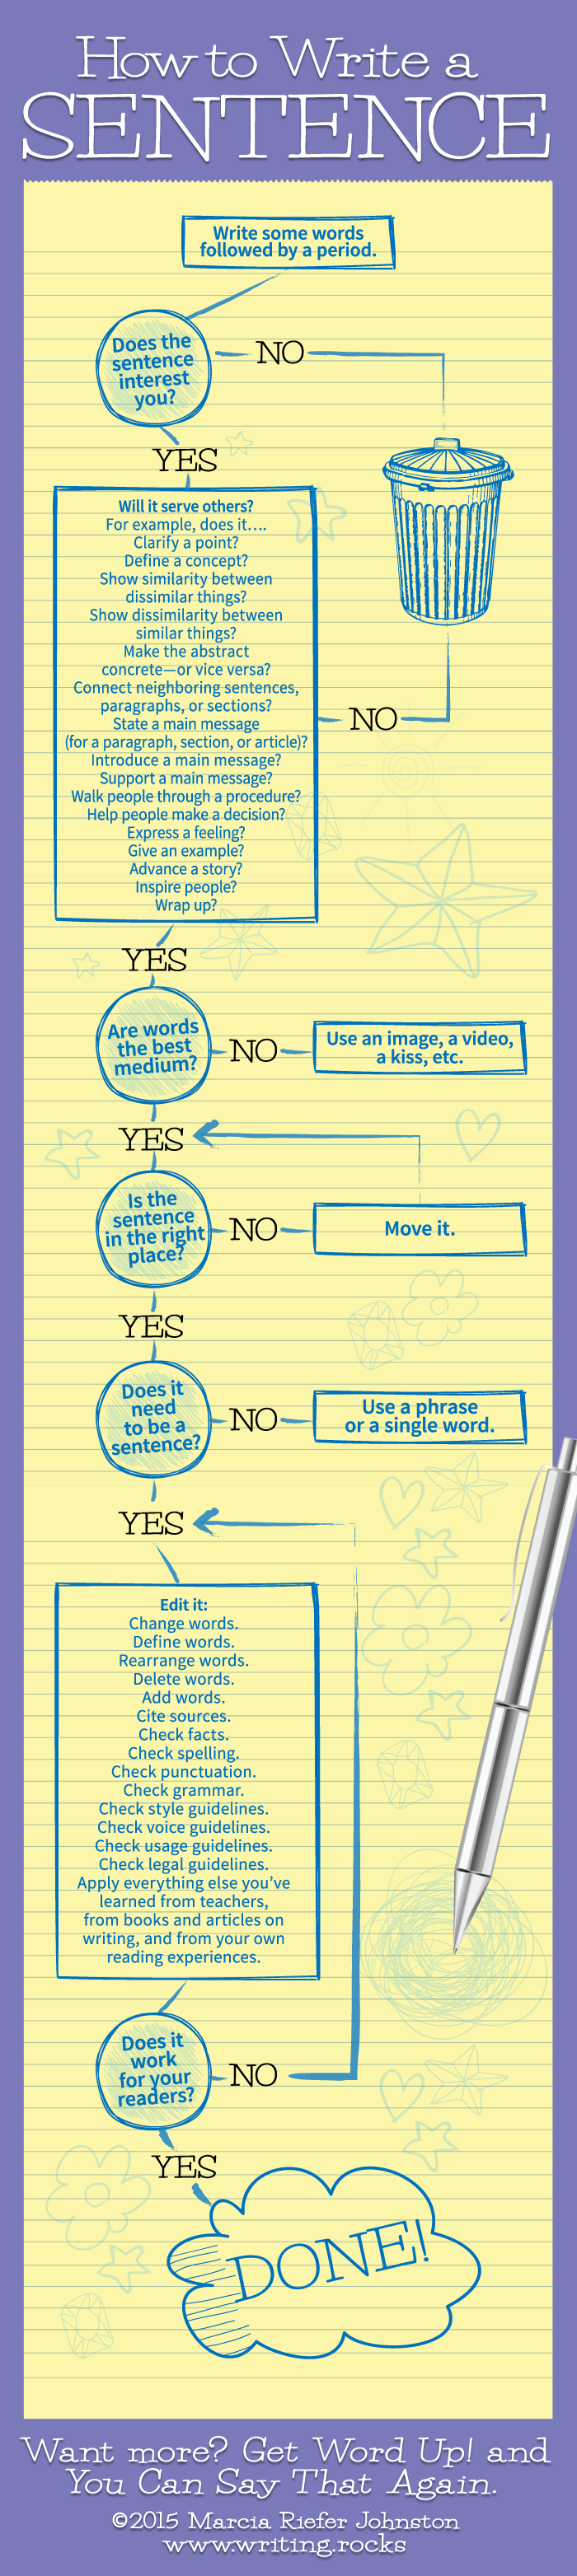 how to write a sentence {infographic}